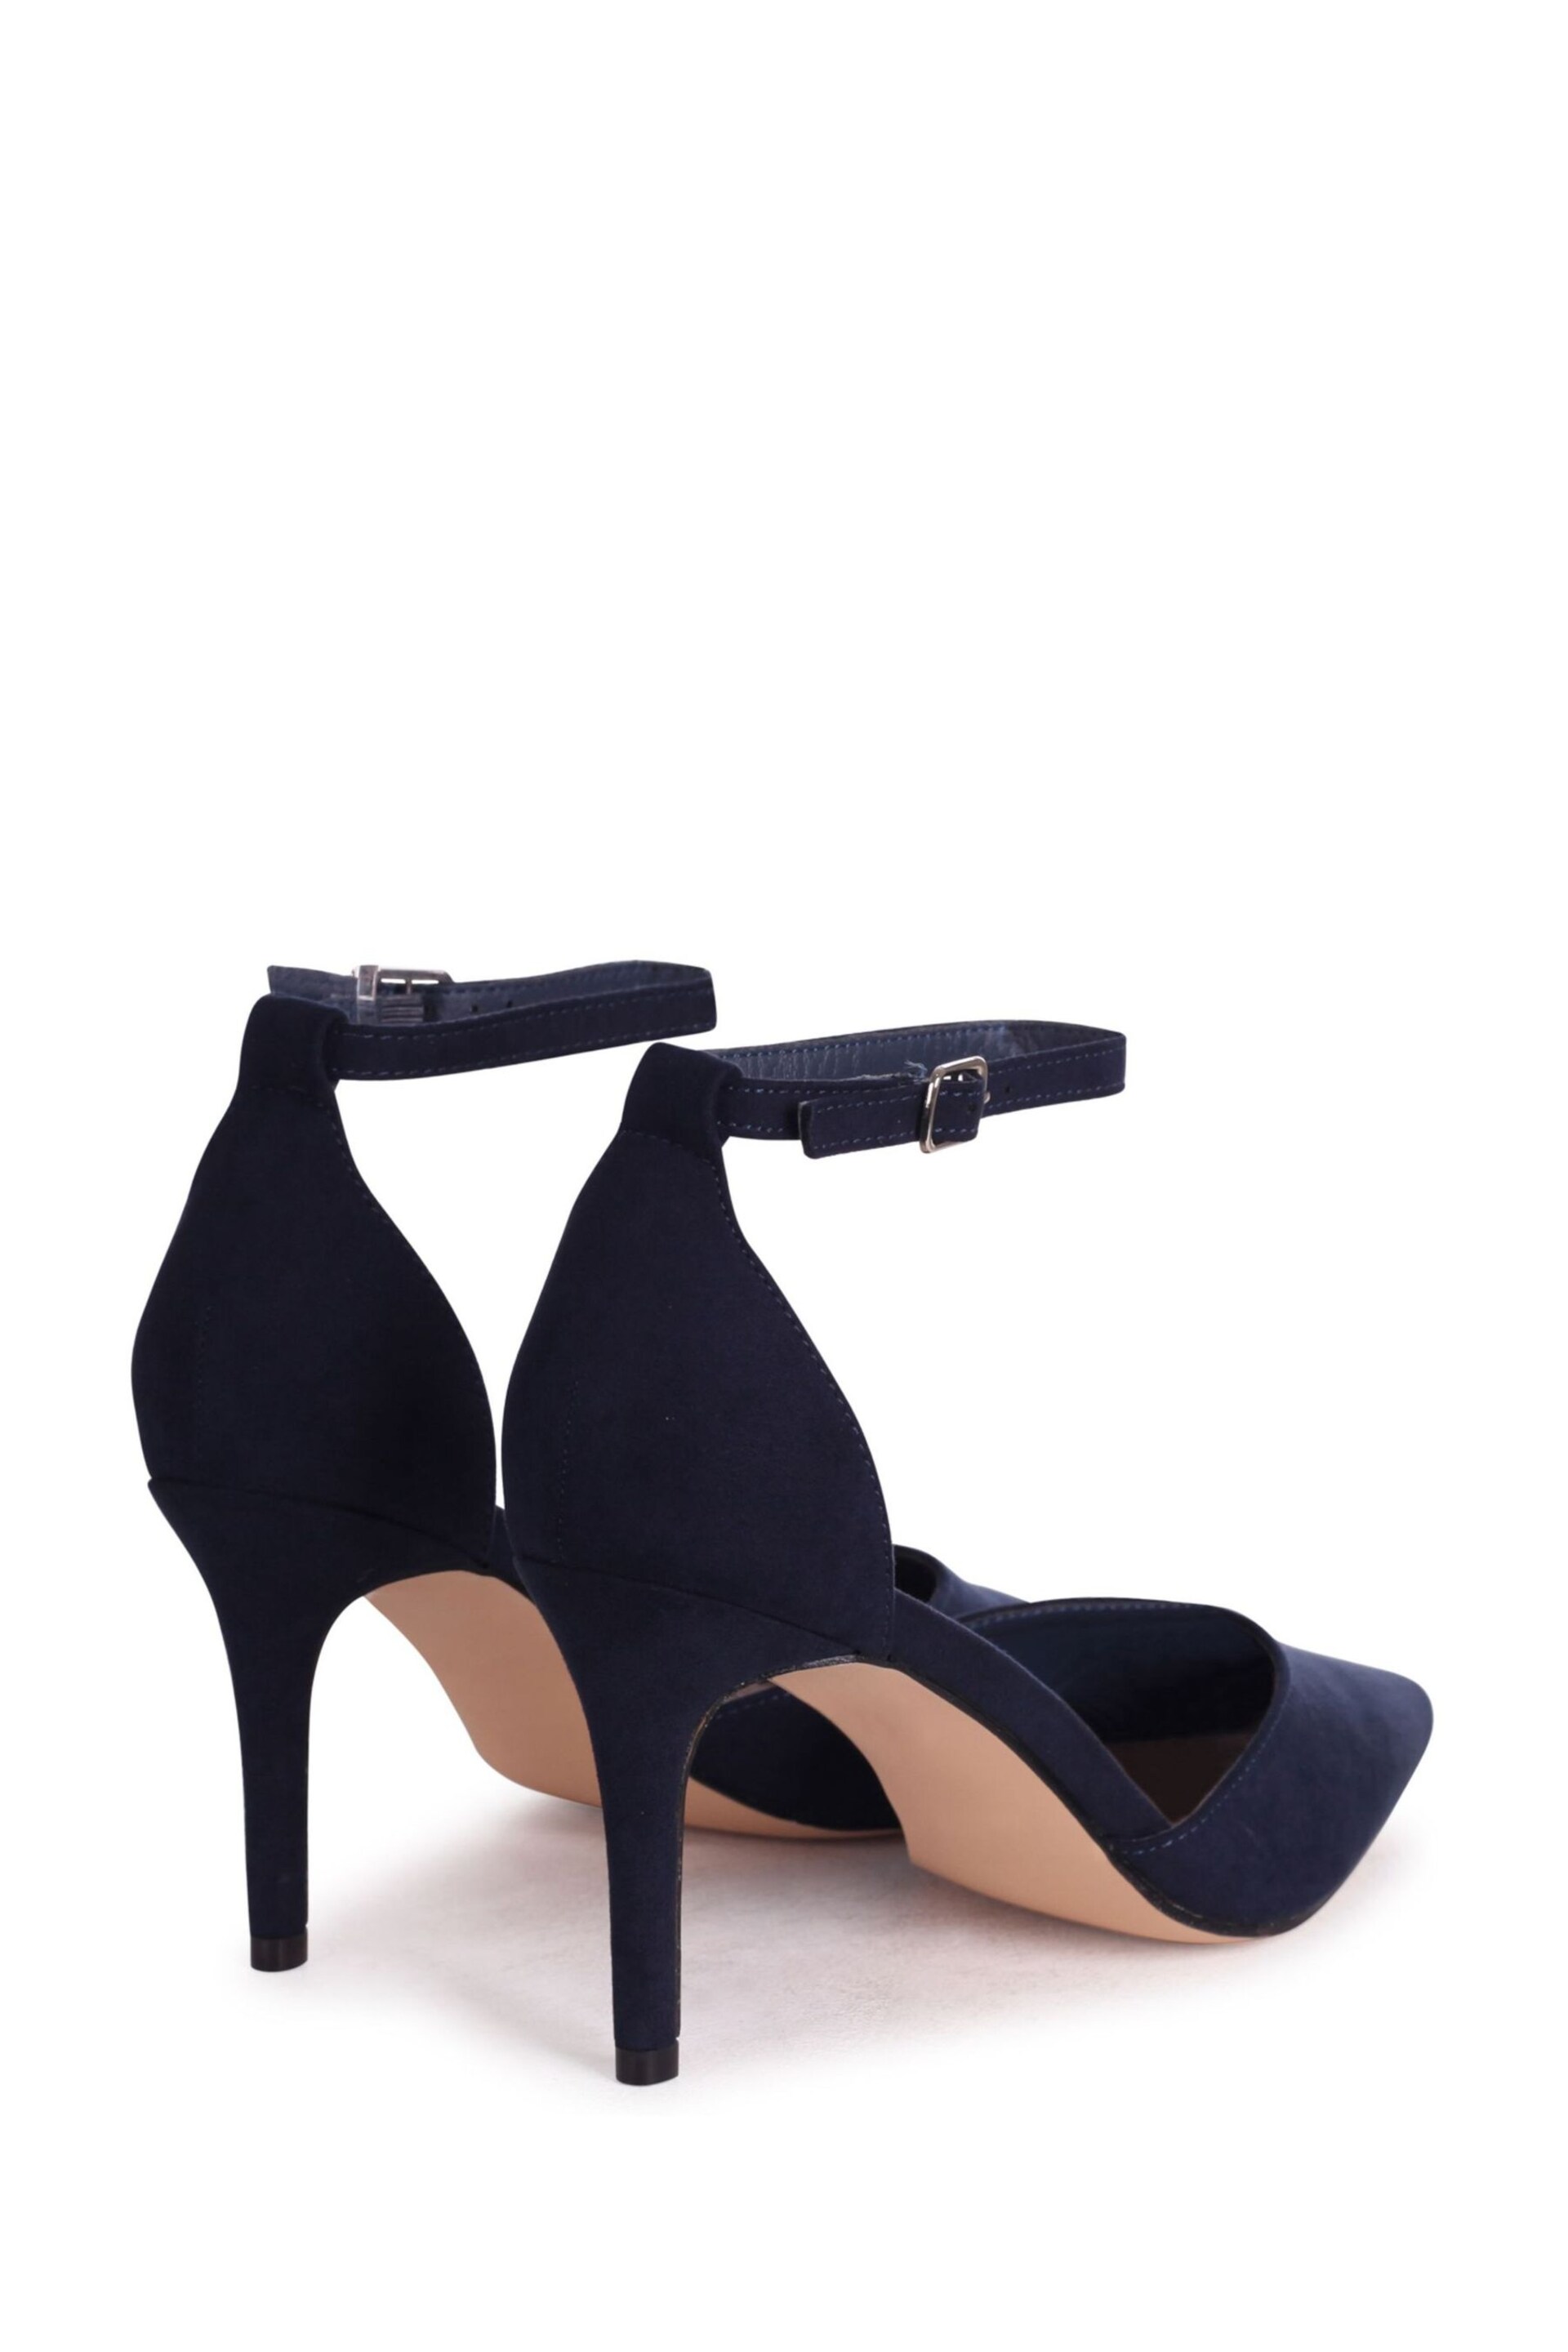 Linzi Blue Maci Stiletto Court Heel With Ankle Strap - Image 4 of 4